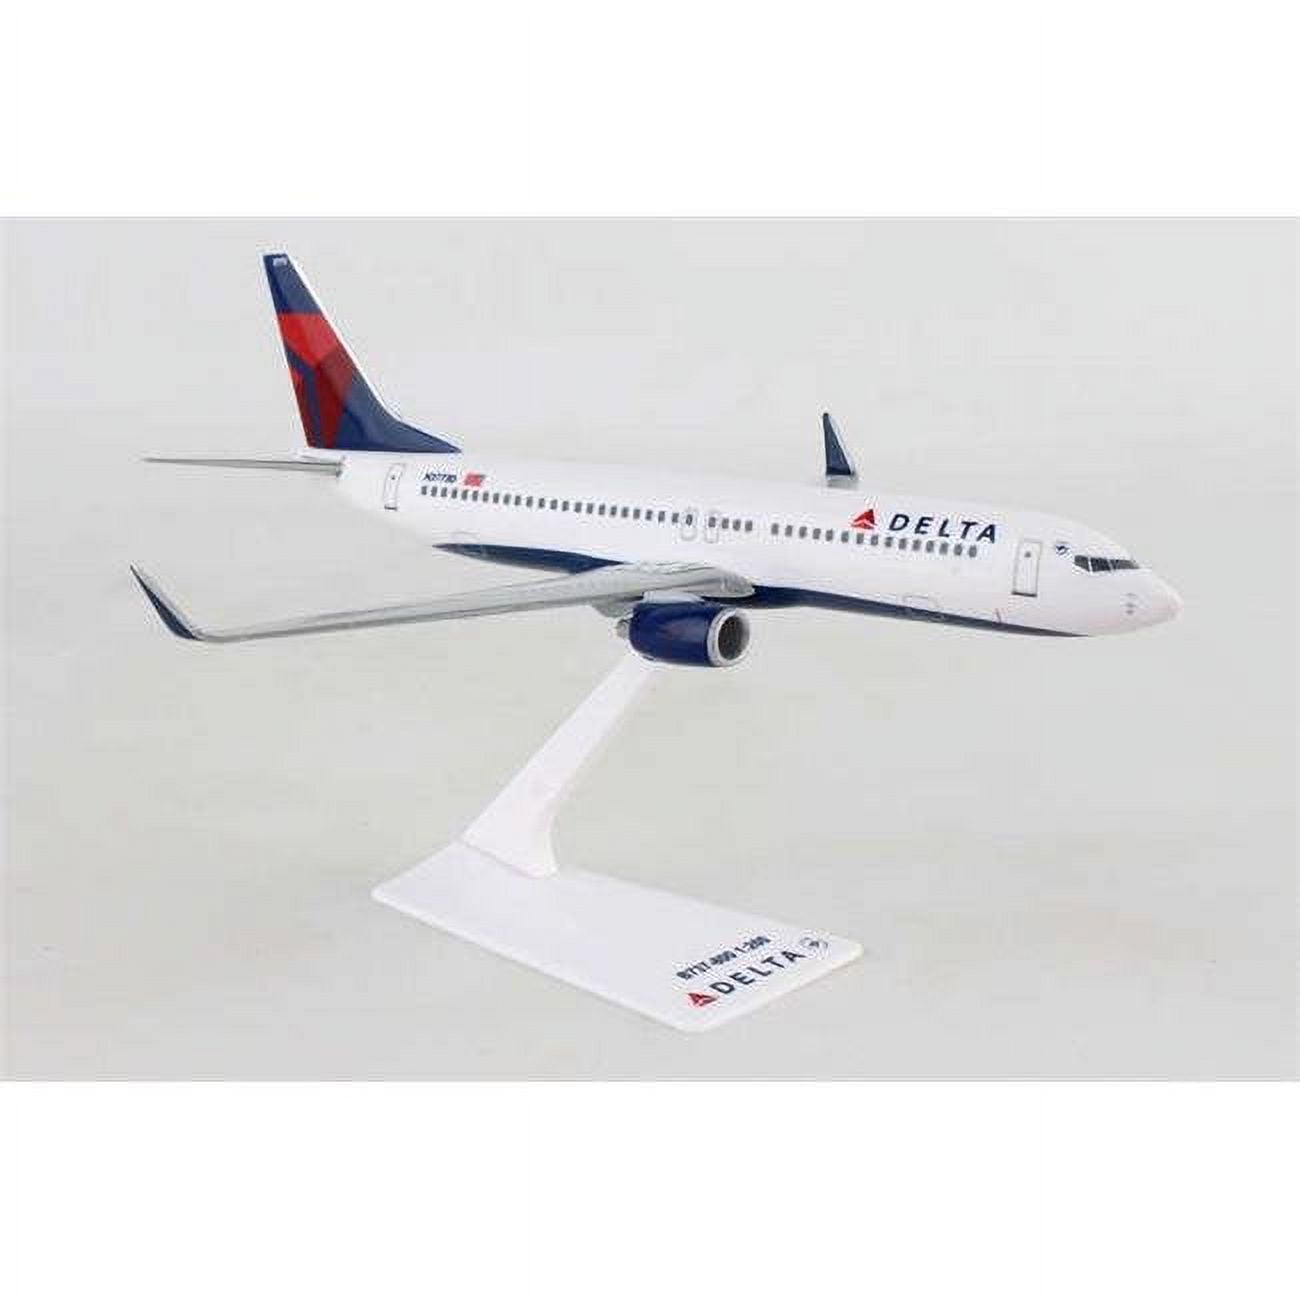 Lp4121nc 737-800 Diecast Model Delta New Livery Airlines With Scale 1 By 200